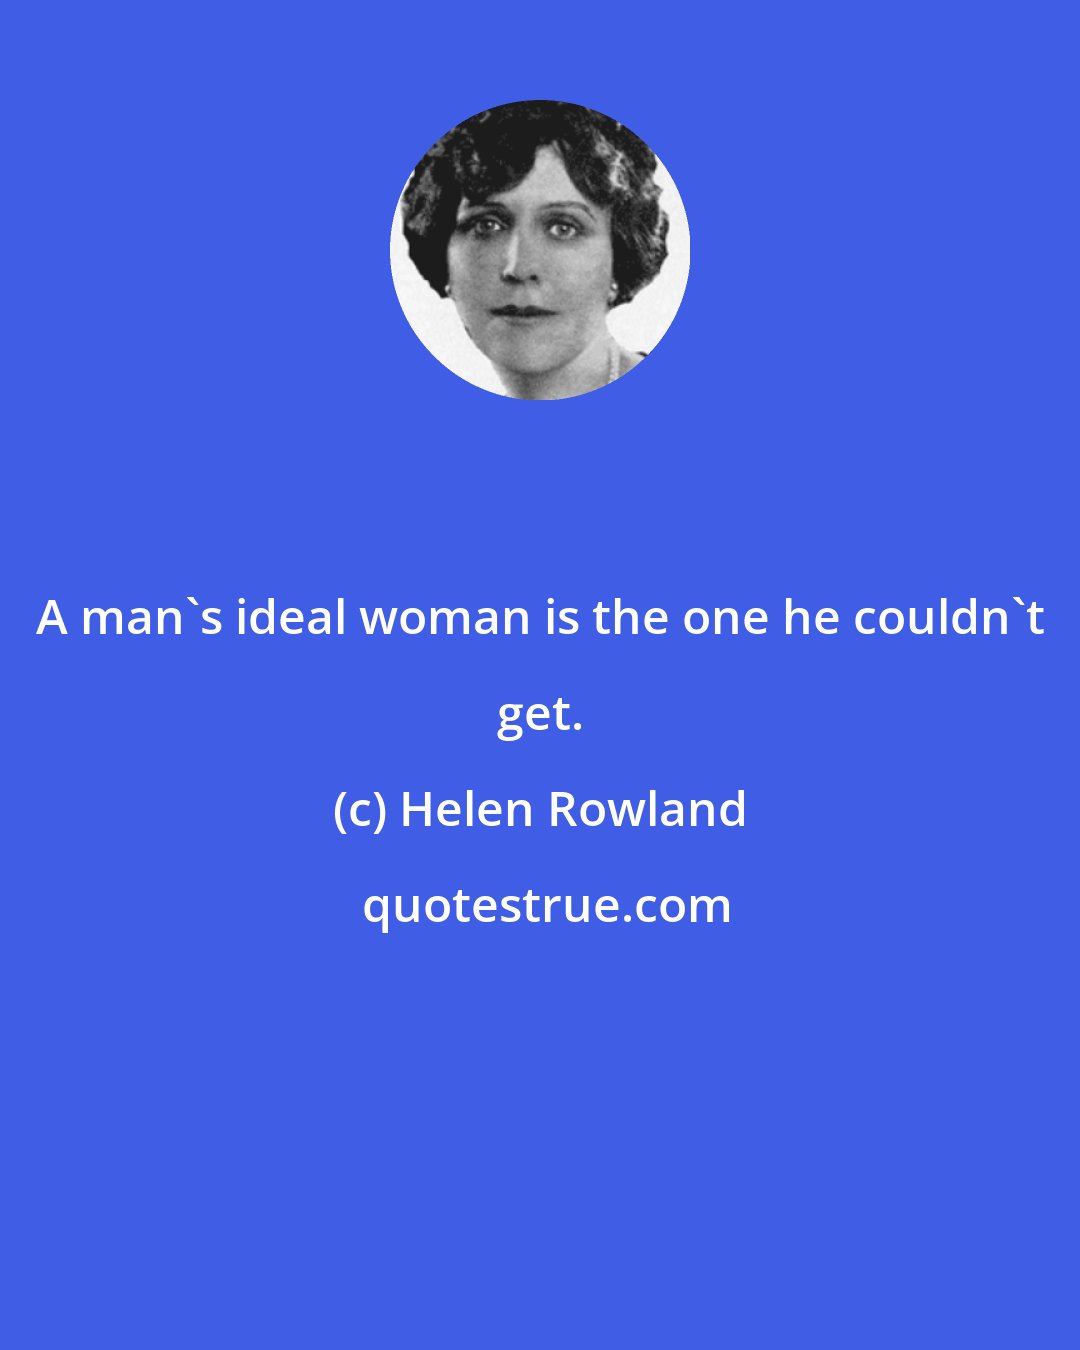 Helen Rowland: A man's ideal woman is the one he couldn't get.